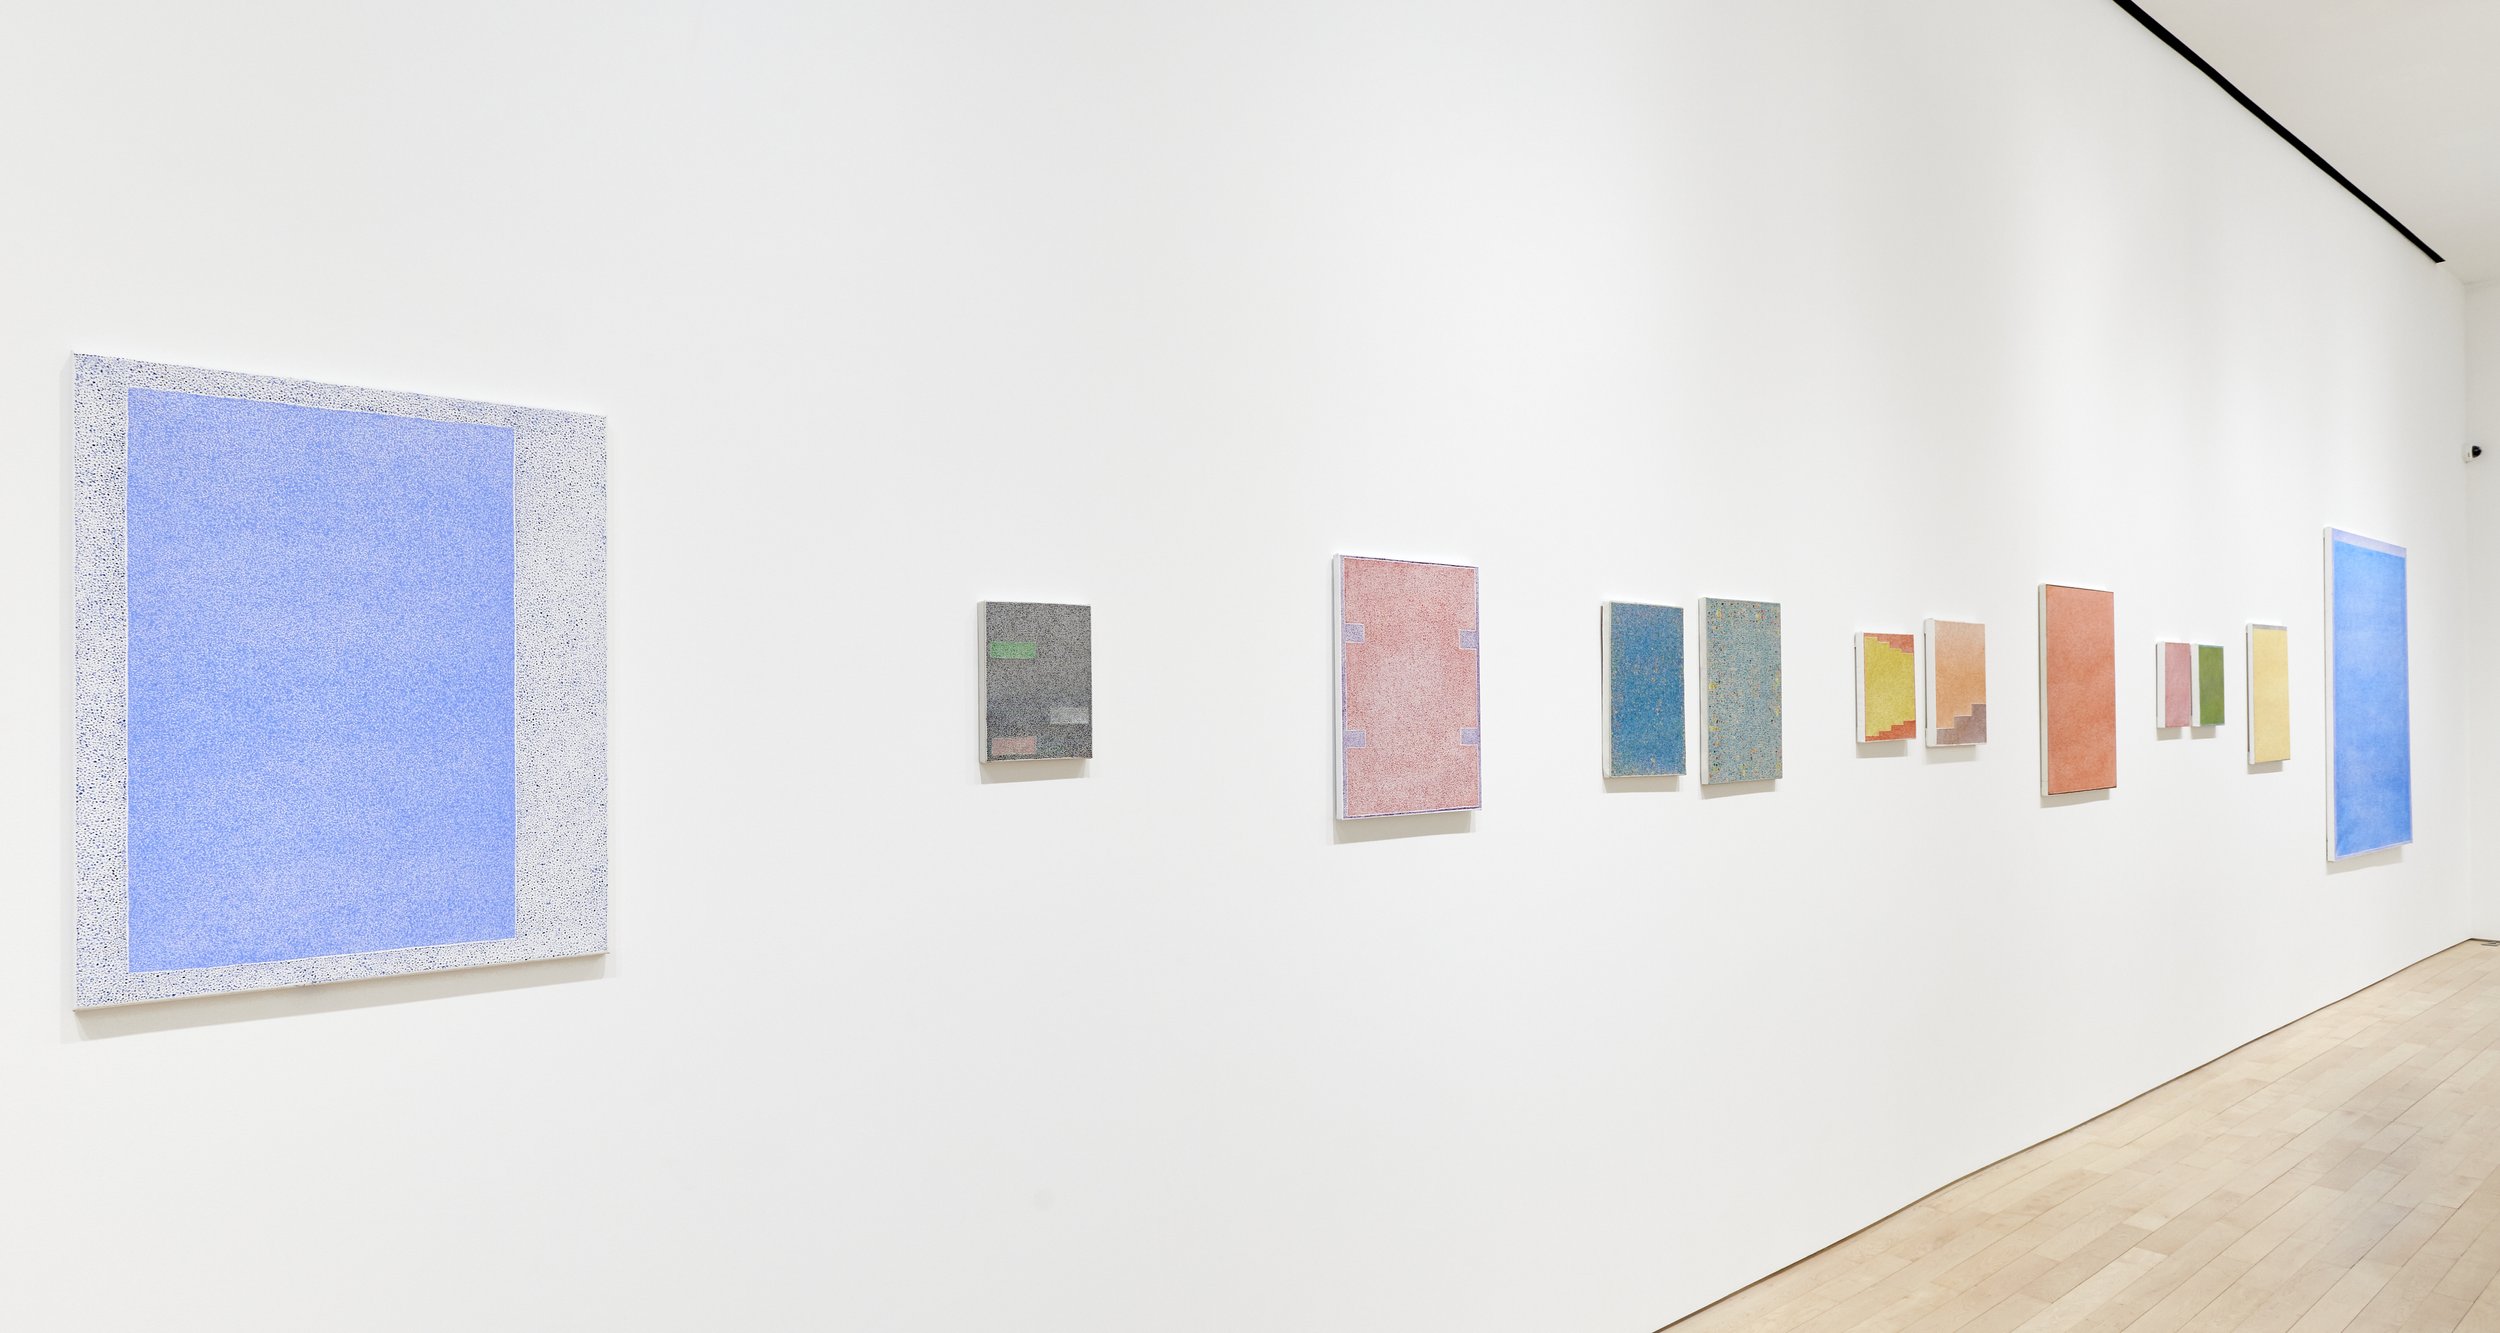 Howard Smith, "Marks in Time", 2022, Installation view at Jane Lombard Gallery. Image courtesy of Arturo Sanchez.